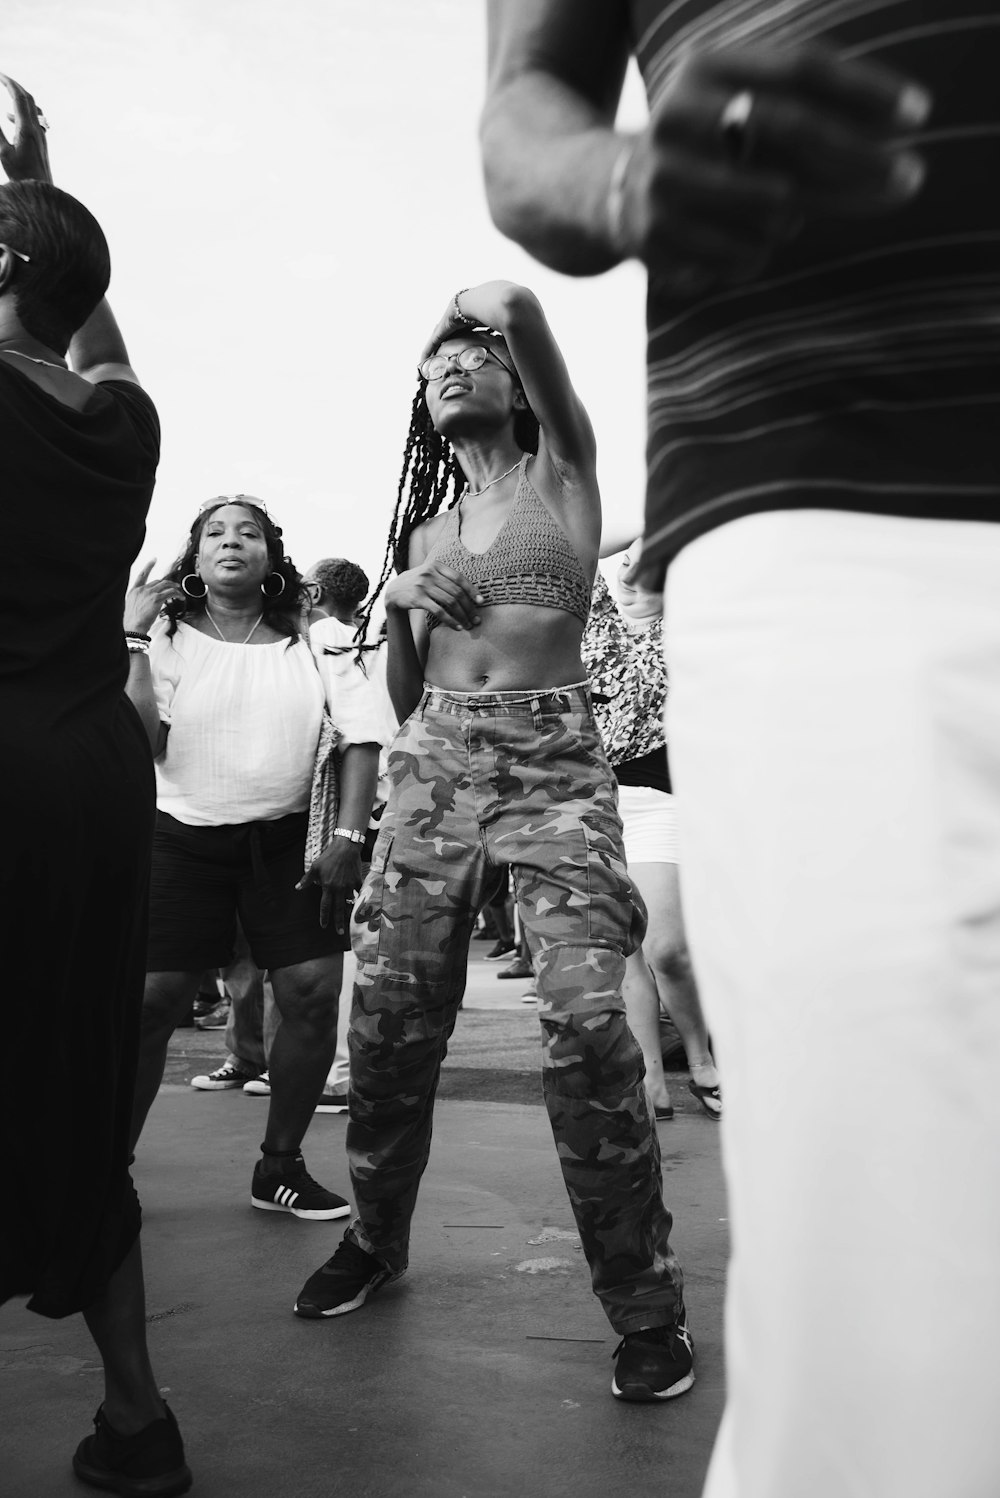 grayscale photo of woman dancing surrounded by people